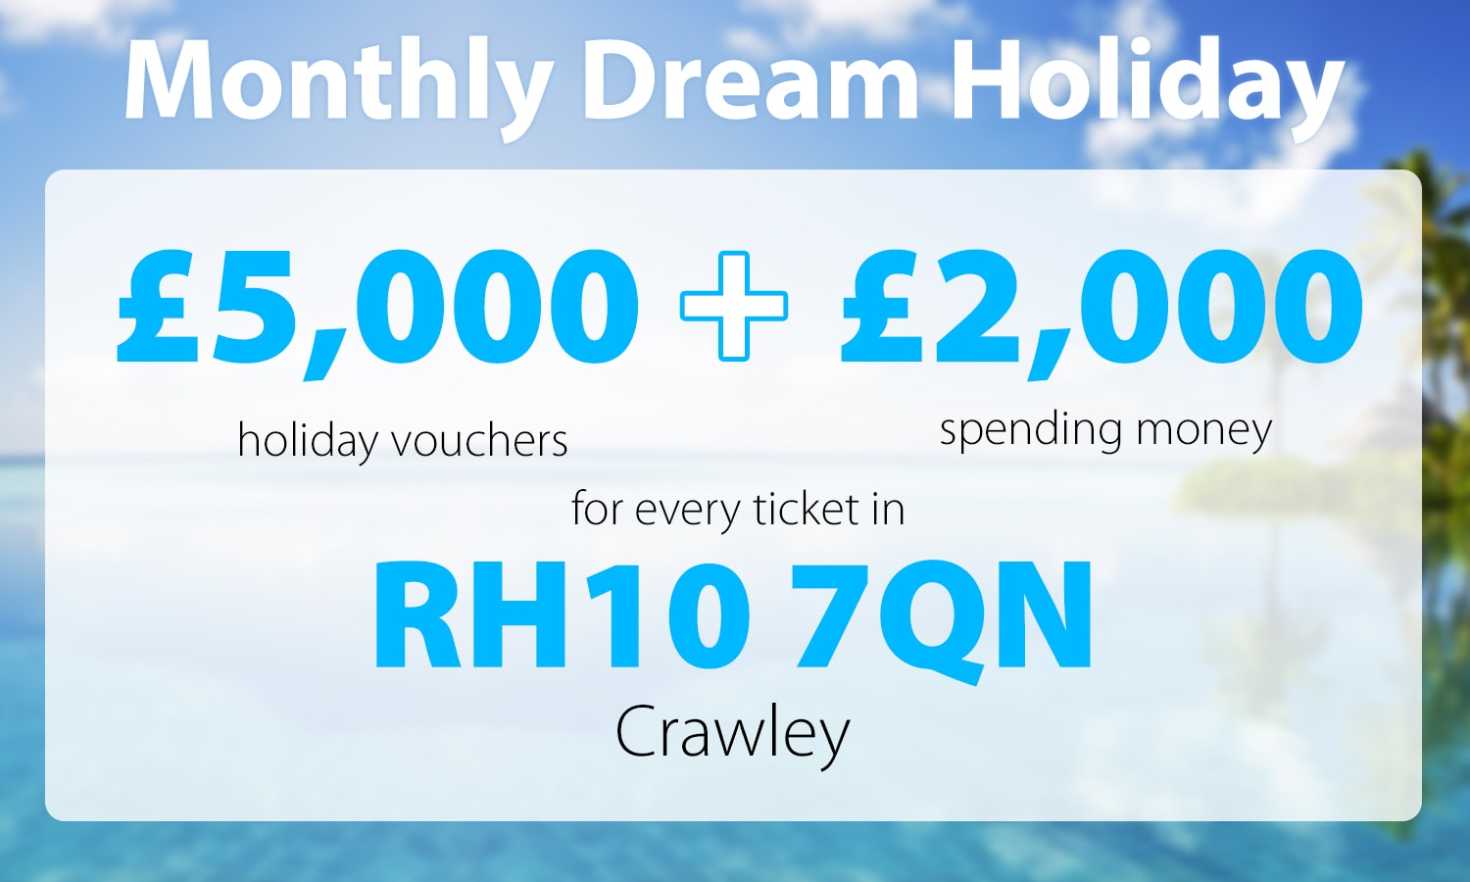 January's Dream Holiday landed in postcode RH10 7QN in Crawley